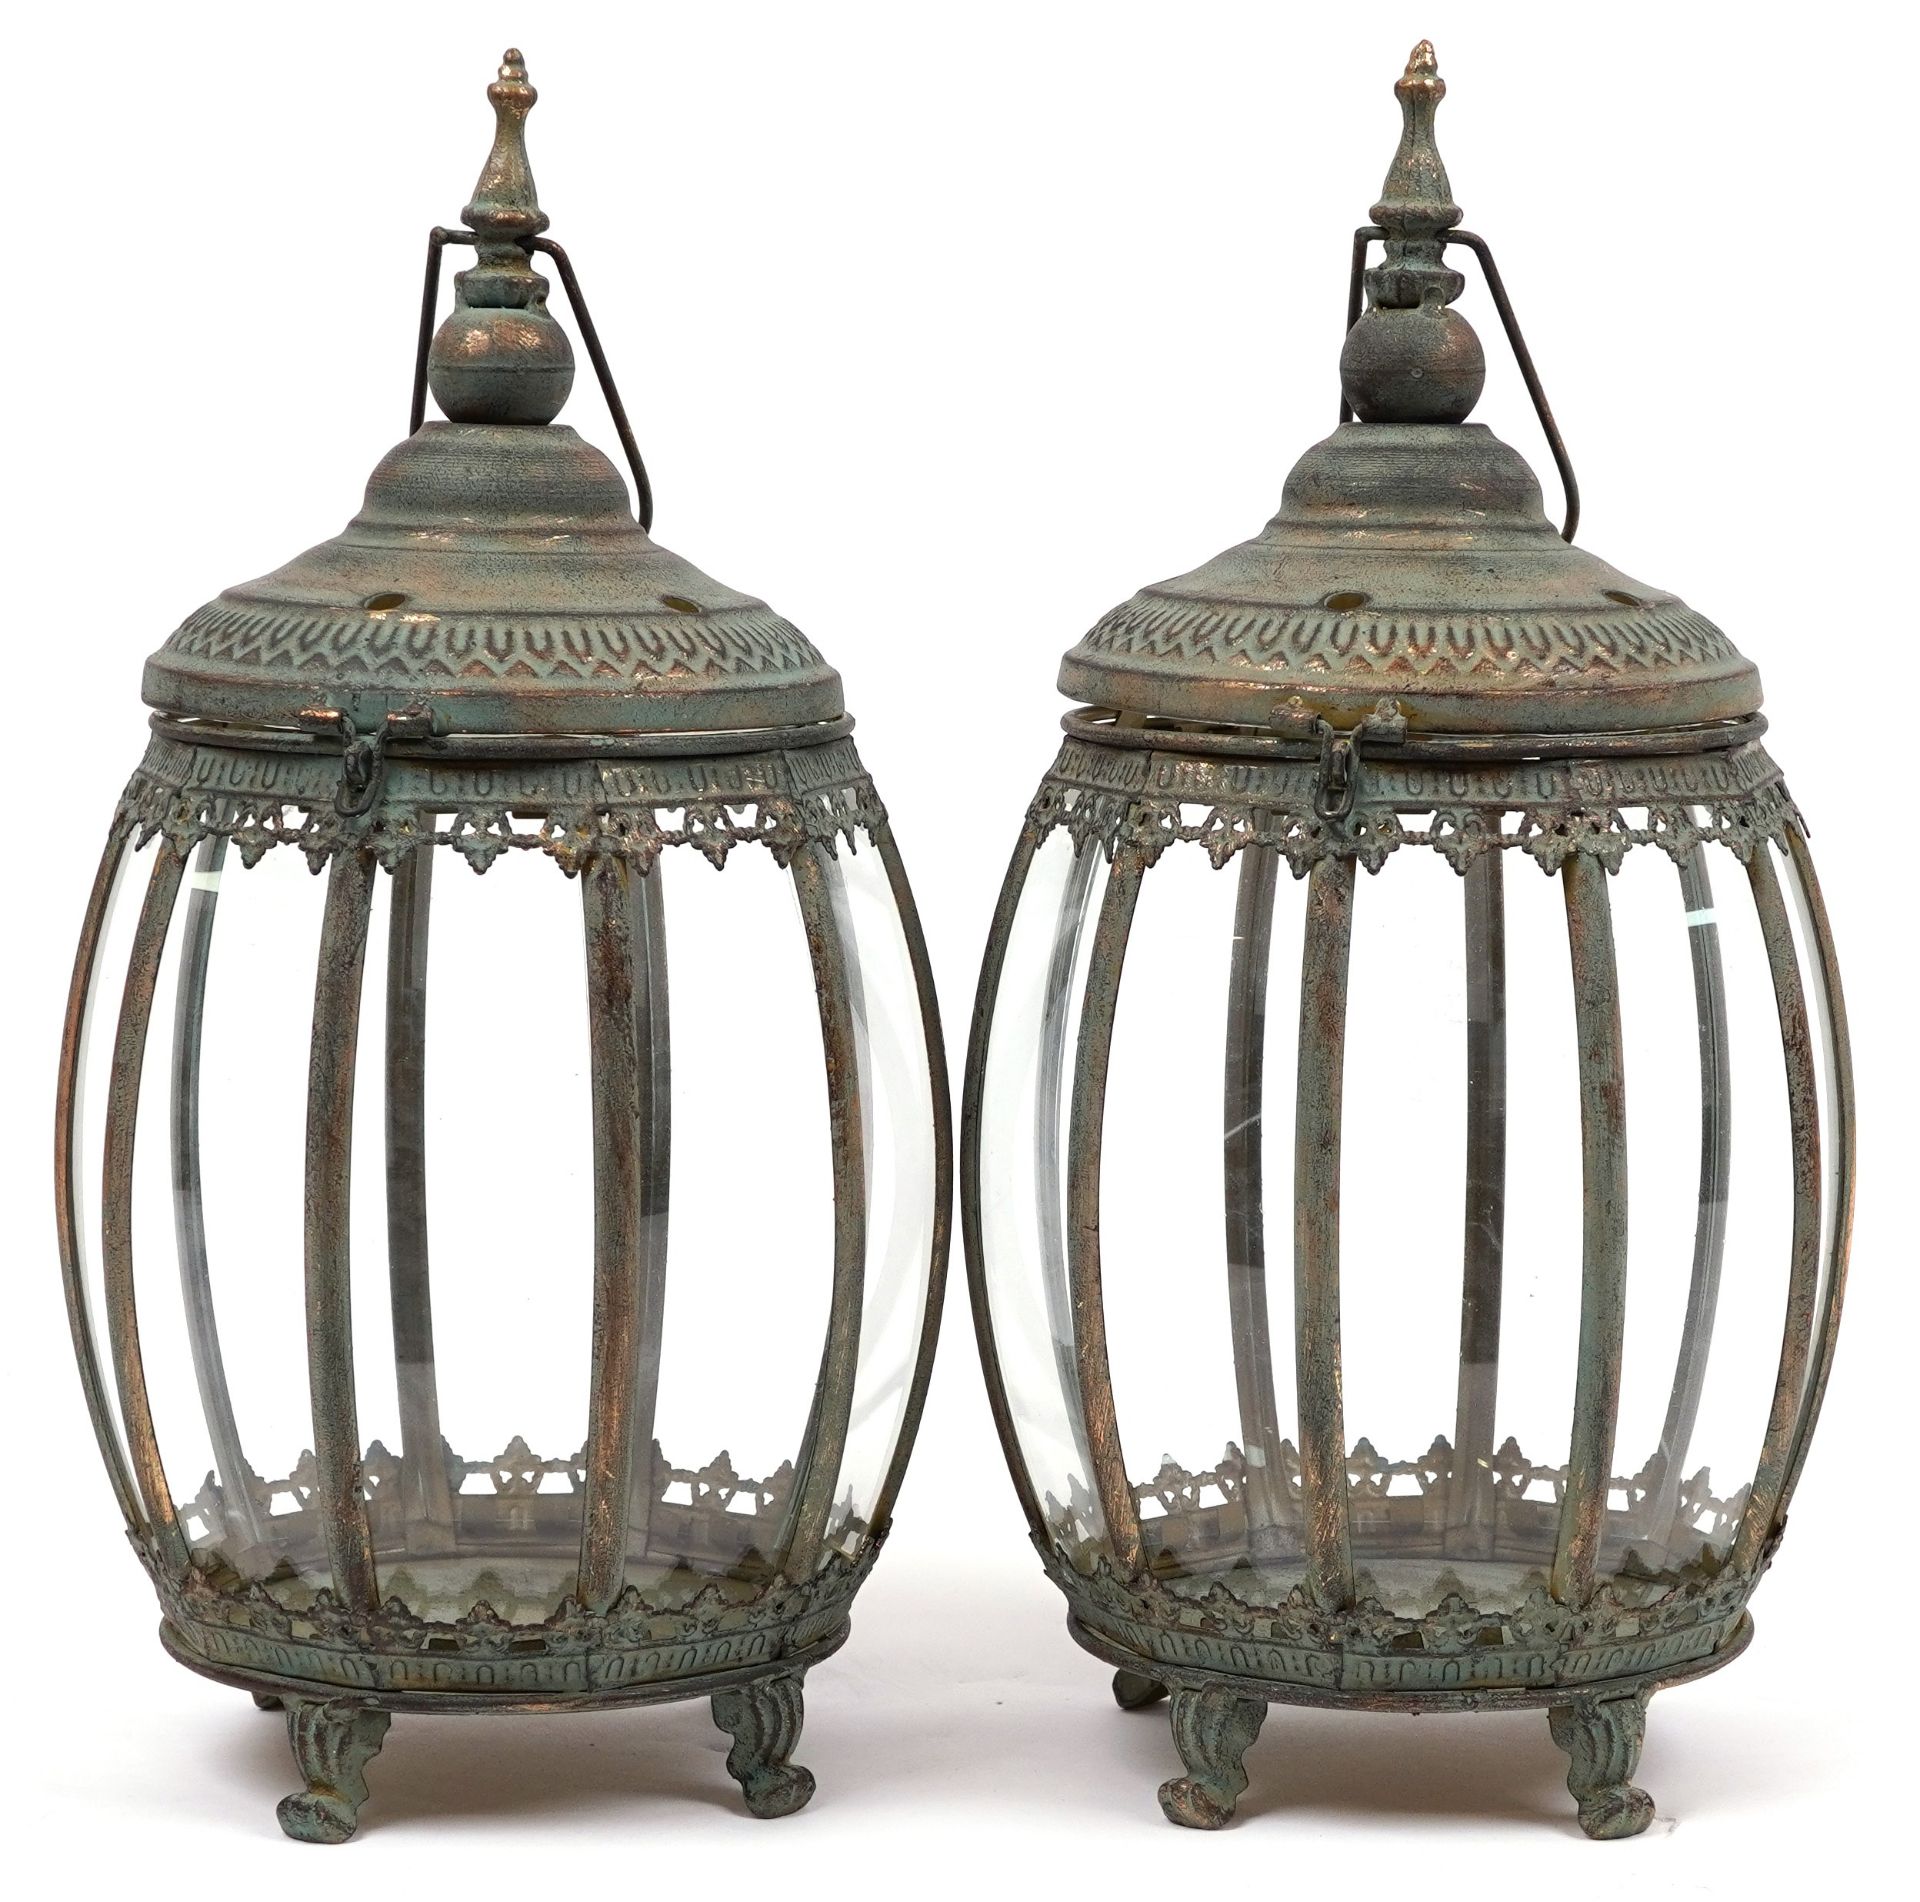 Pair of bronzed hanging lanterns with glass panels on paw feet, each 48.5cm high : For further